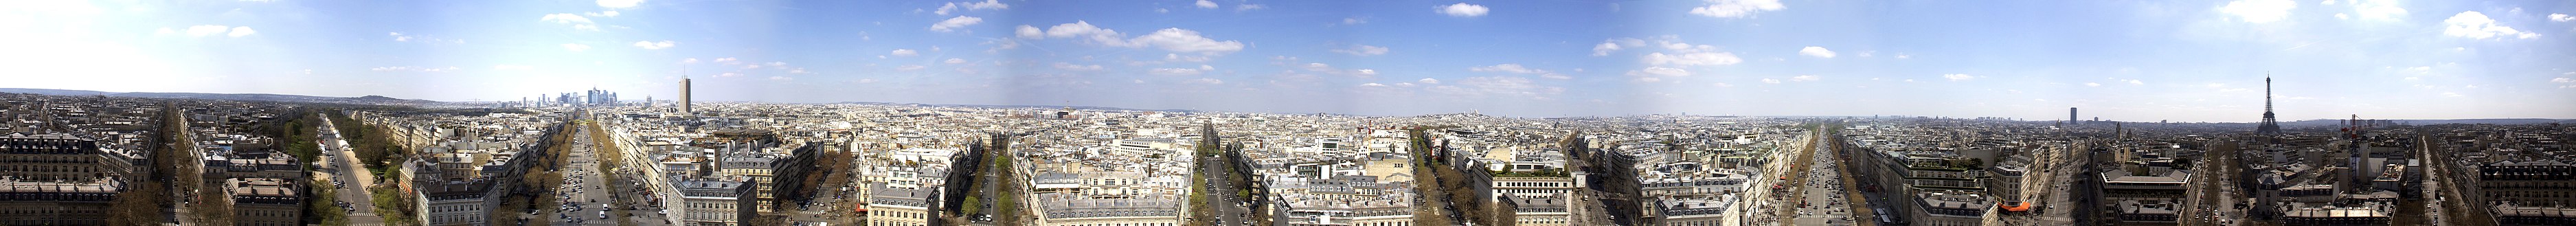 Paris seen from the top of the Arc de Triomphe